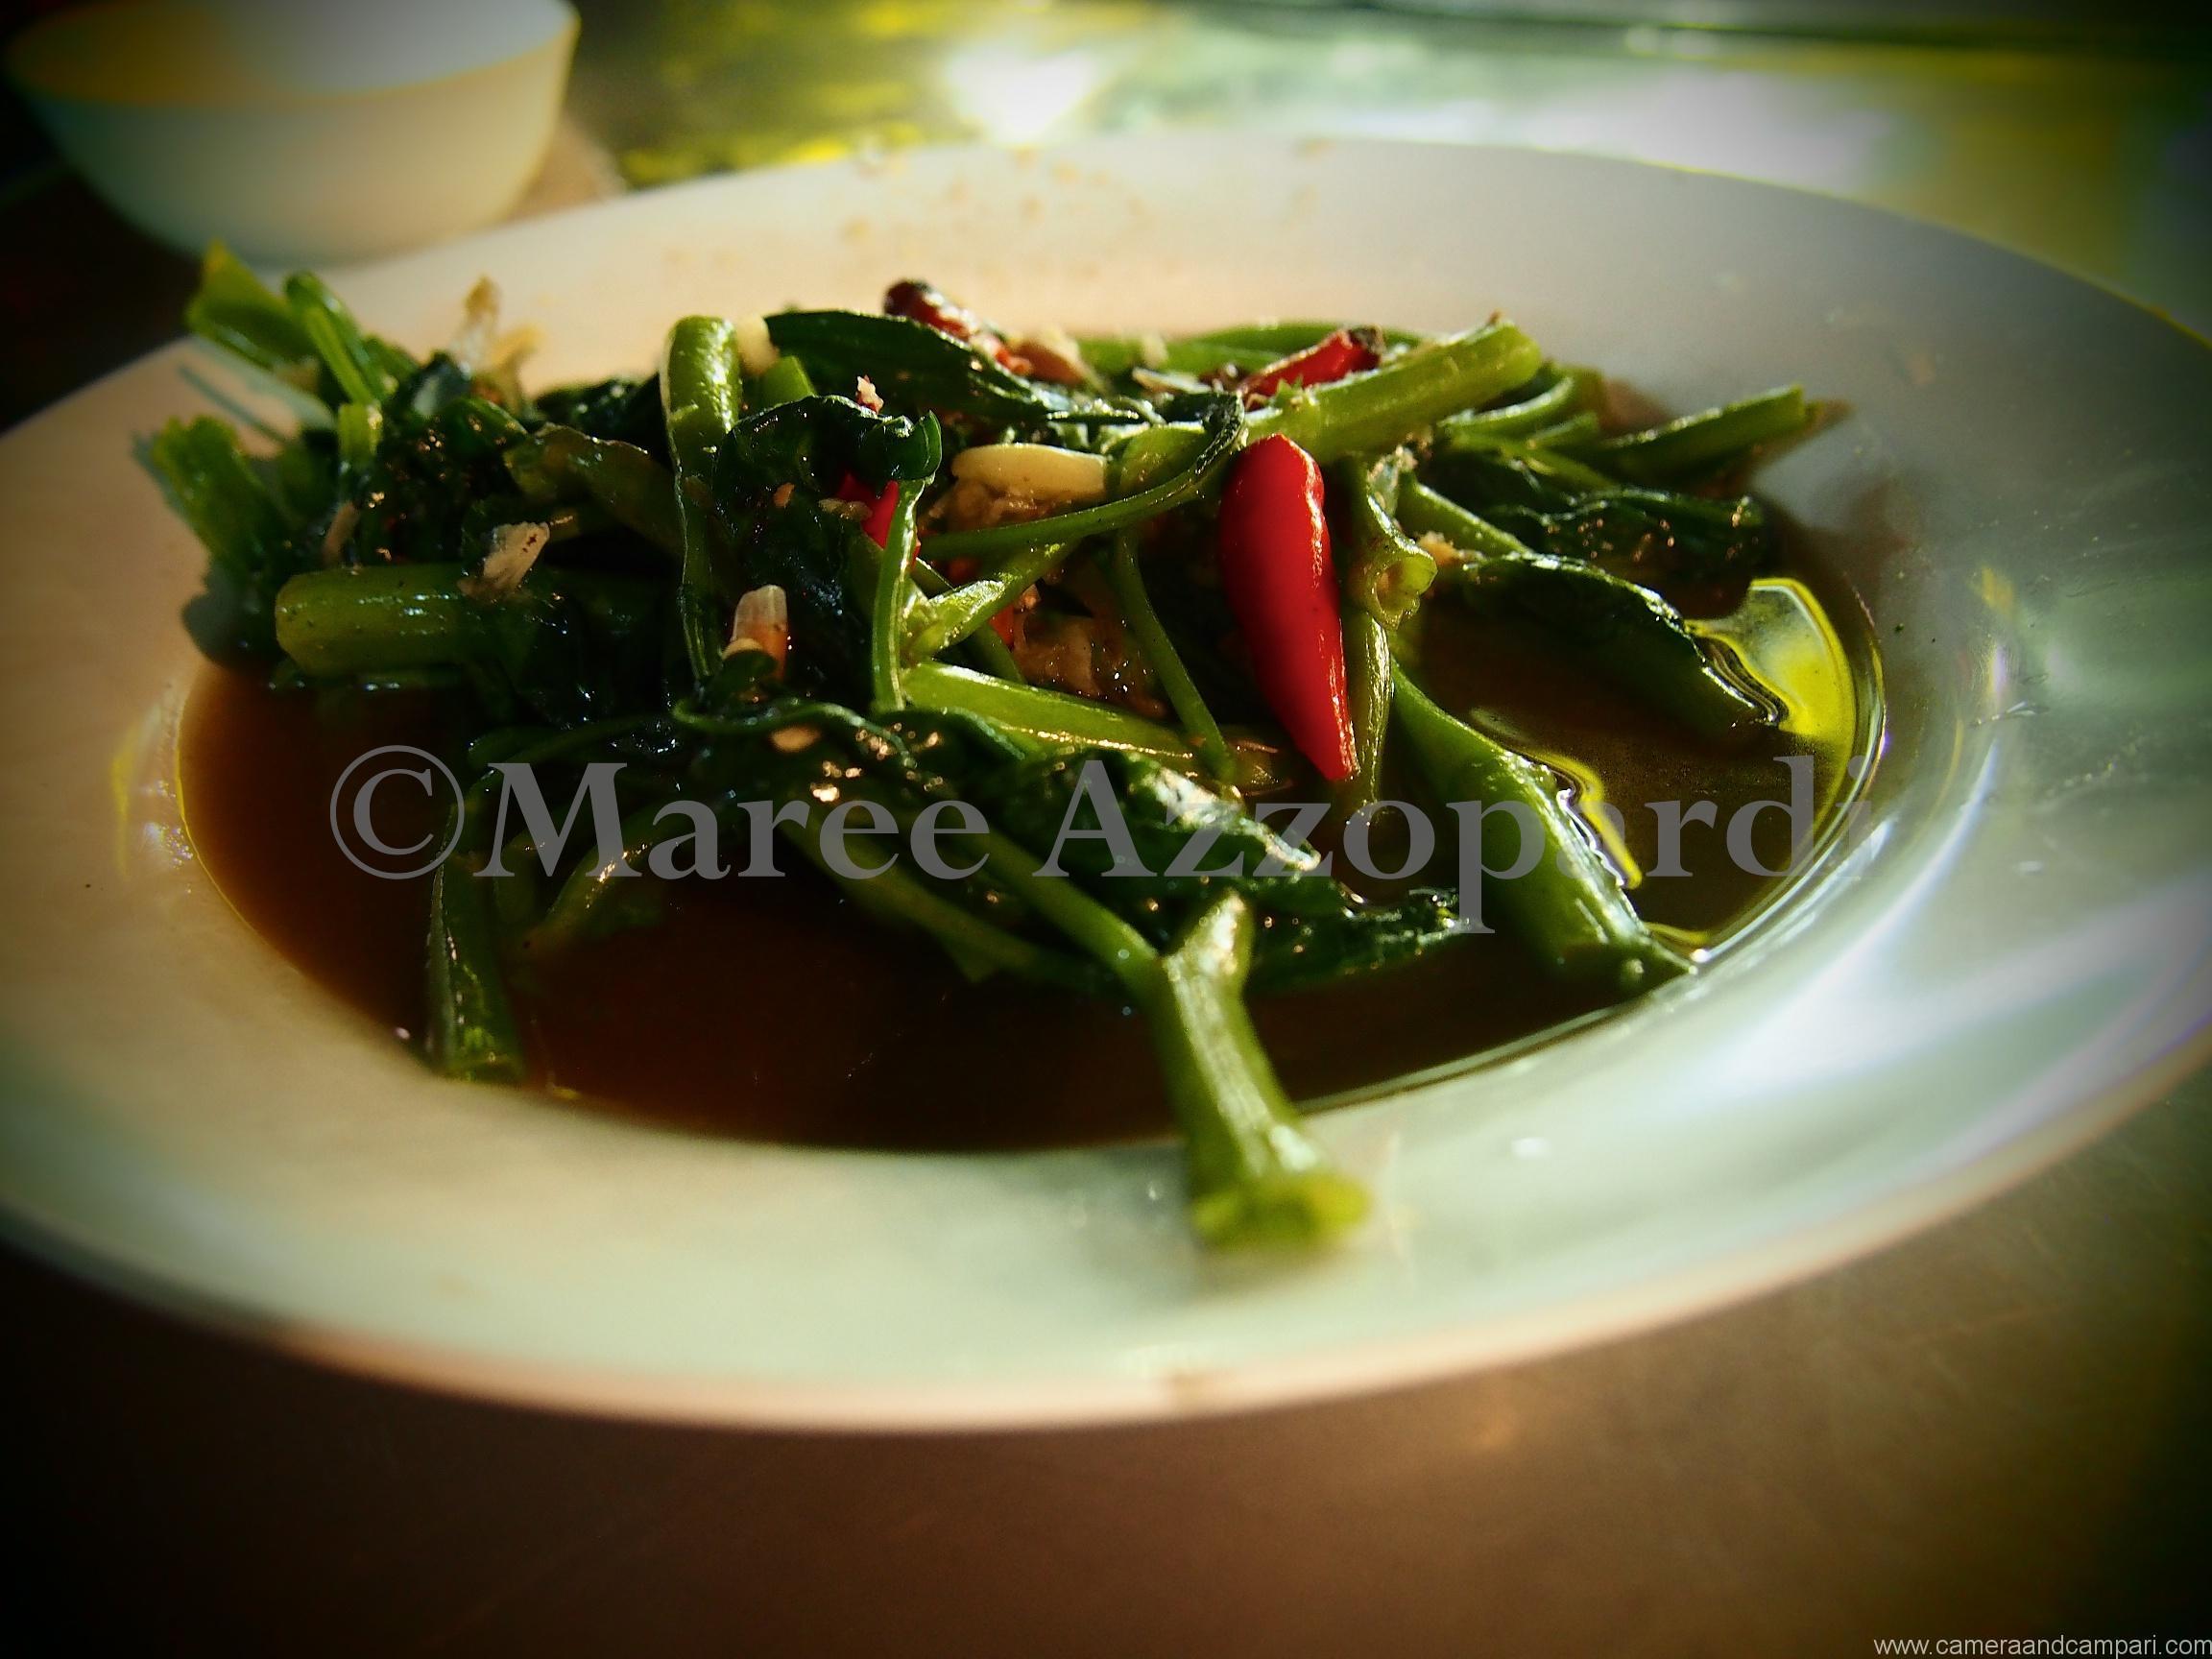 A plate of chilli fried morning glory (water spinach).